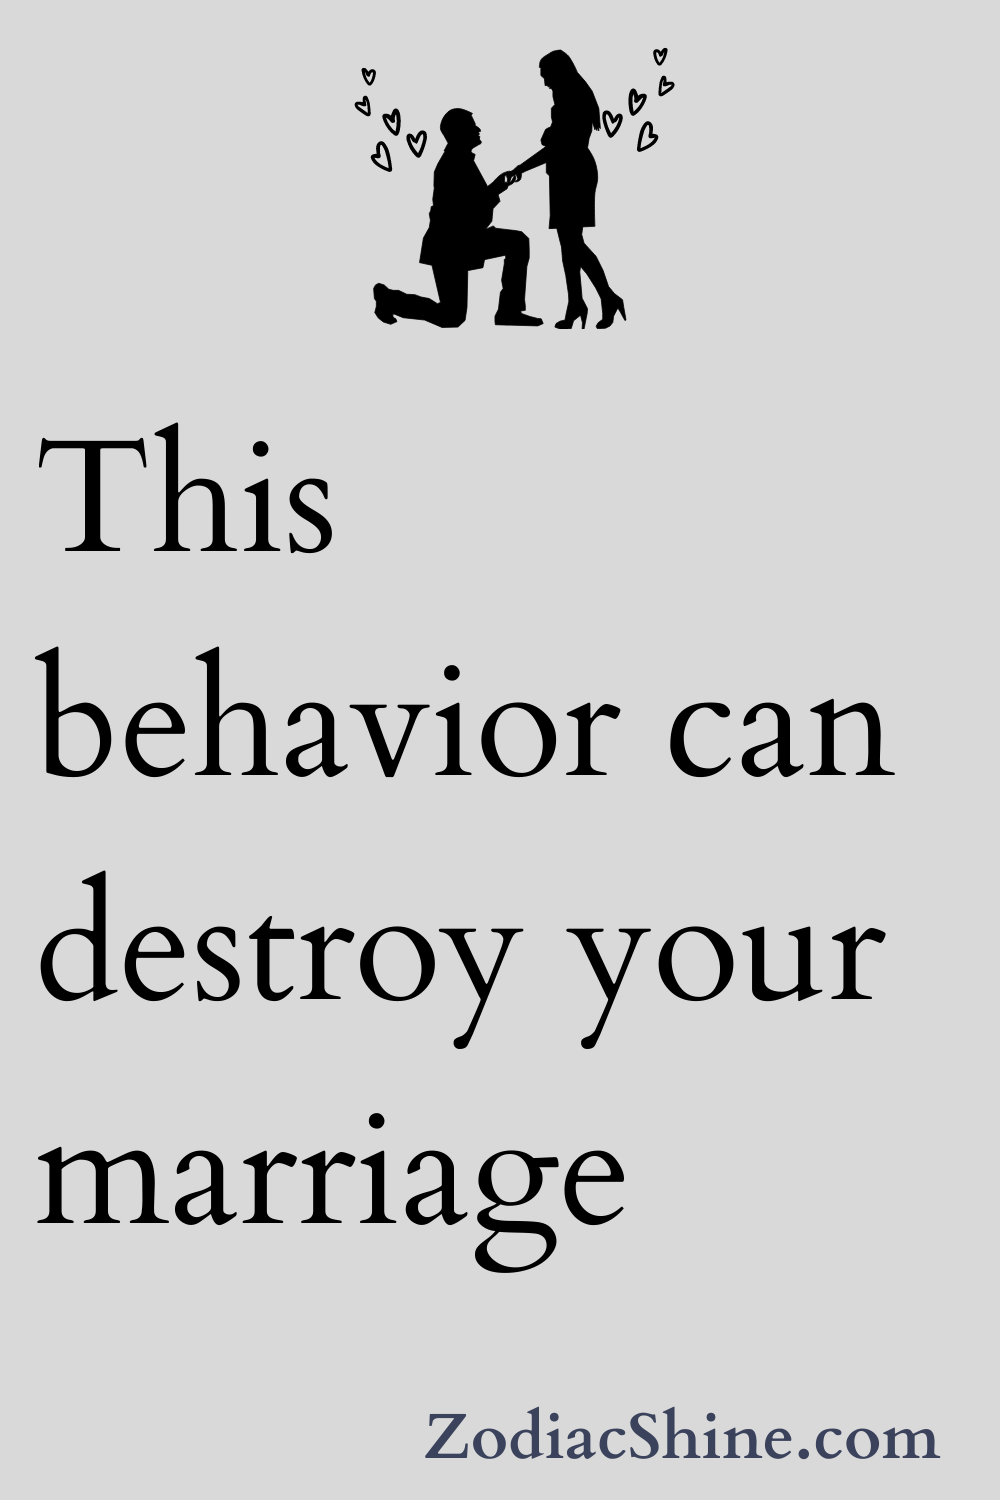 This behavior can destroy your marriage